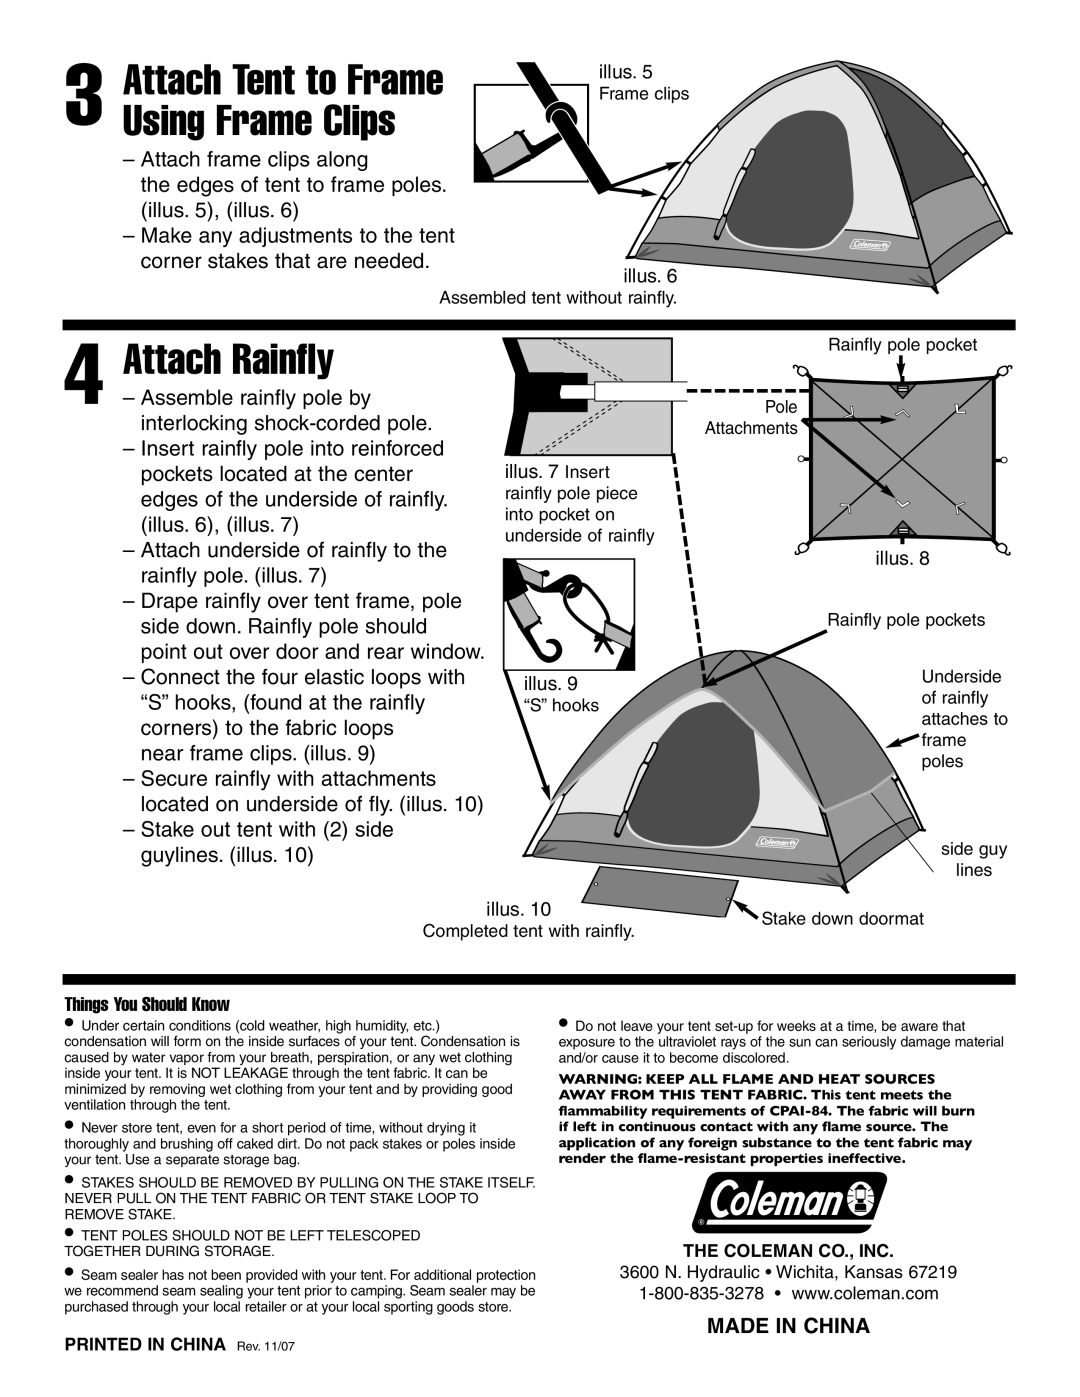 Coleman 9'x7 manual Attach Rainfly, Attach Tent to Frame Using Frame Clips, Made In China 